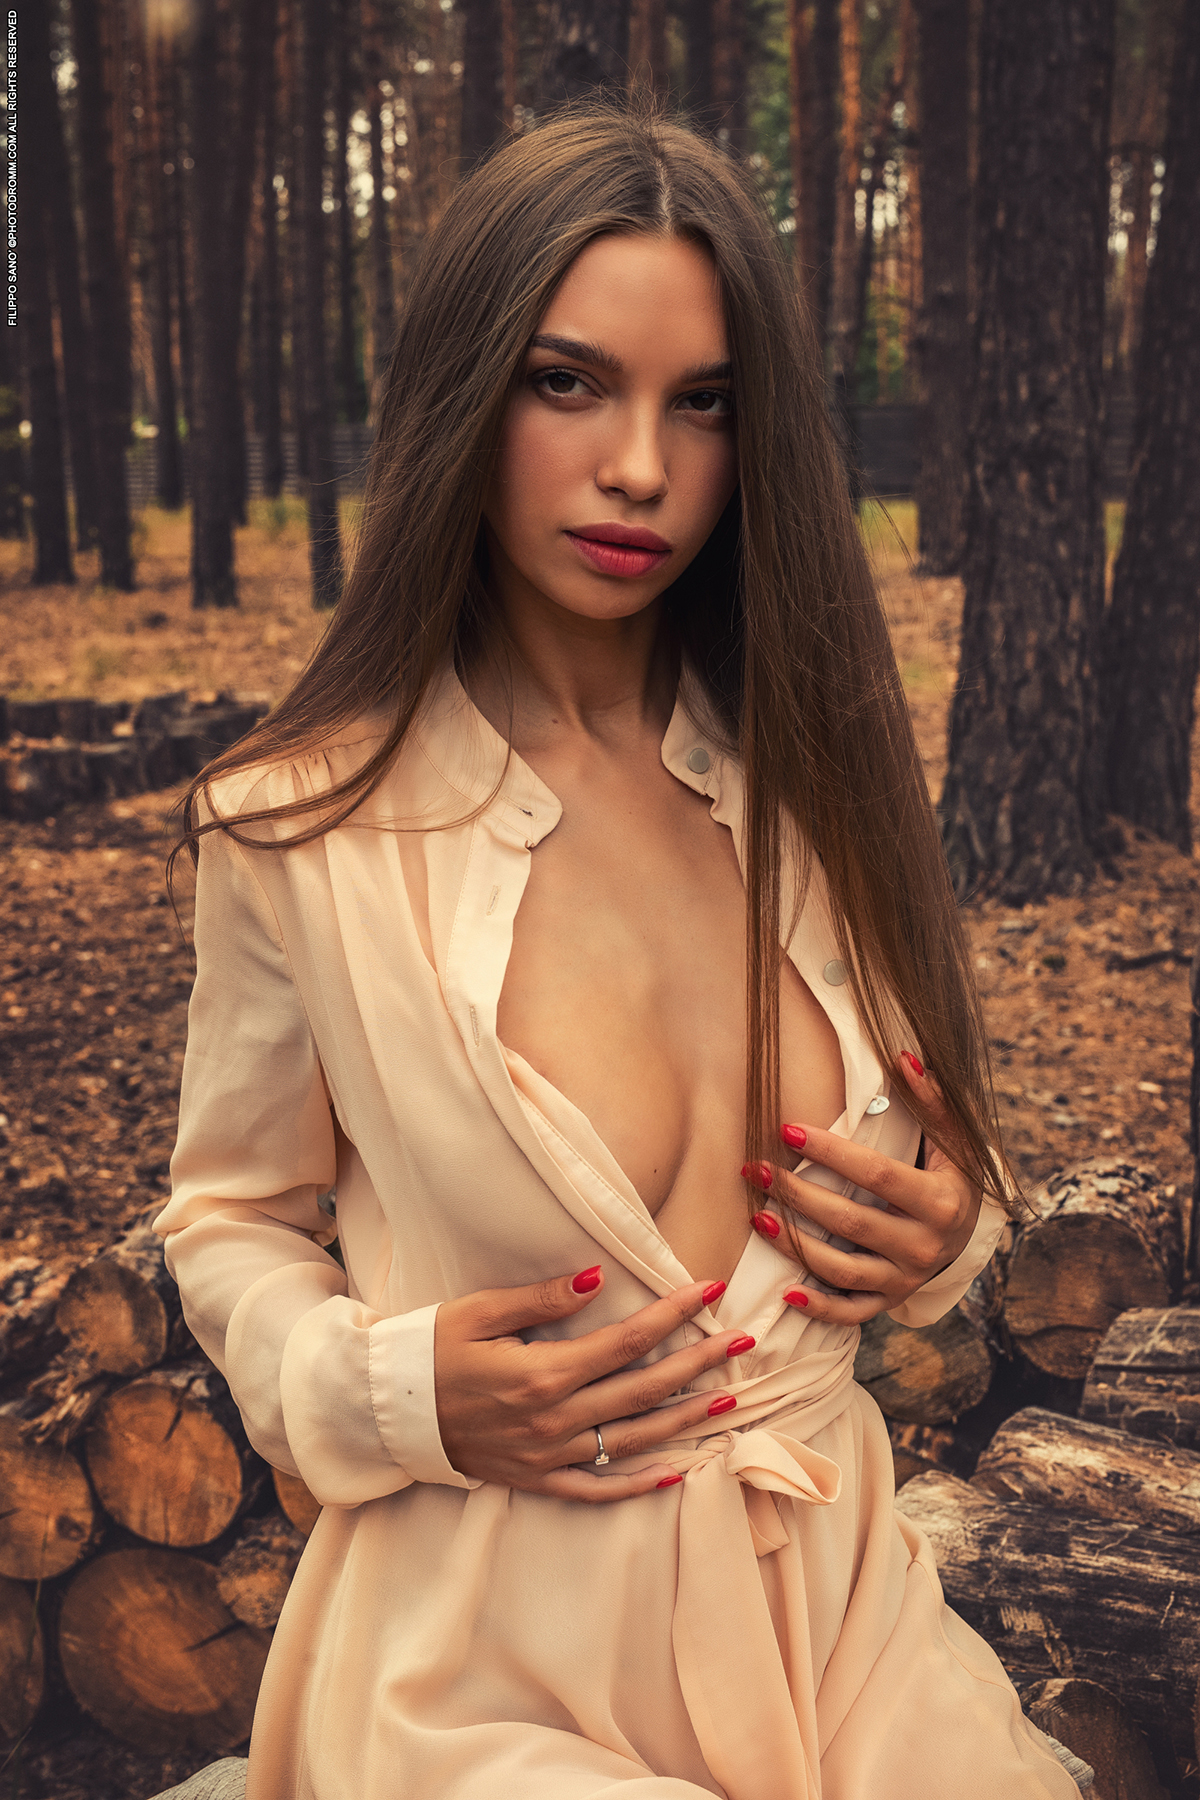 'In The Woods' with Alina via Photodromm - Pic #15